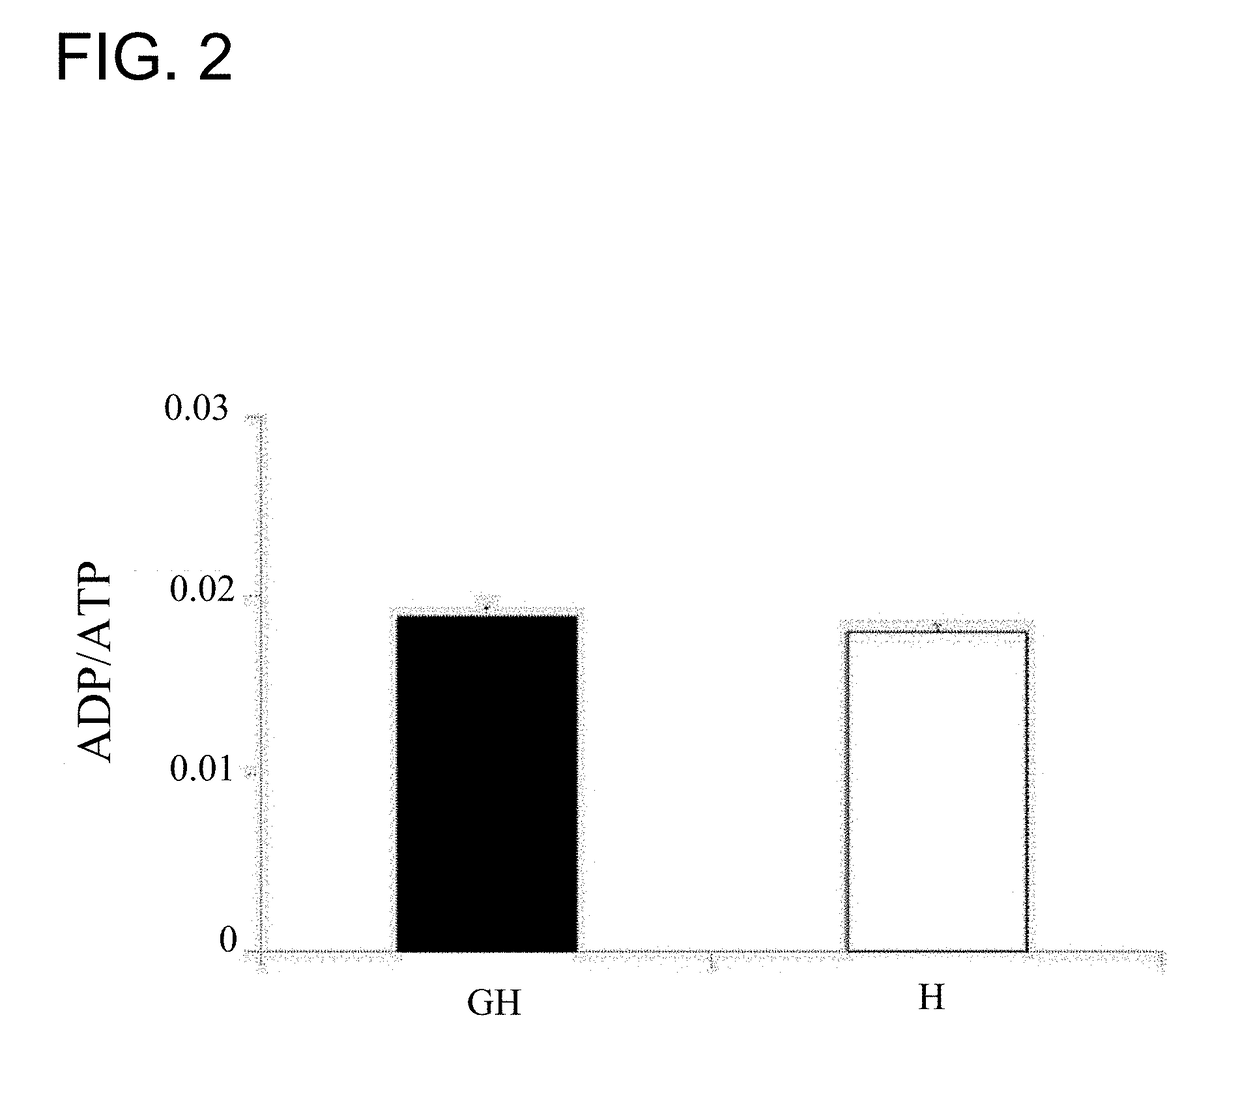 Method for separating cell from biological tissue